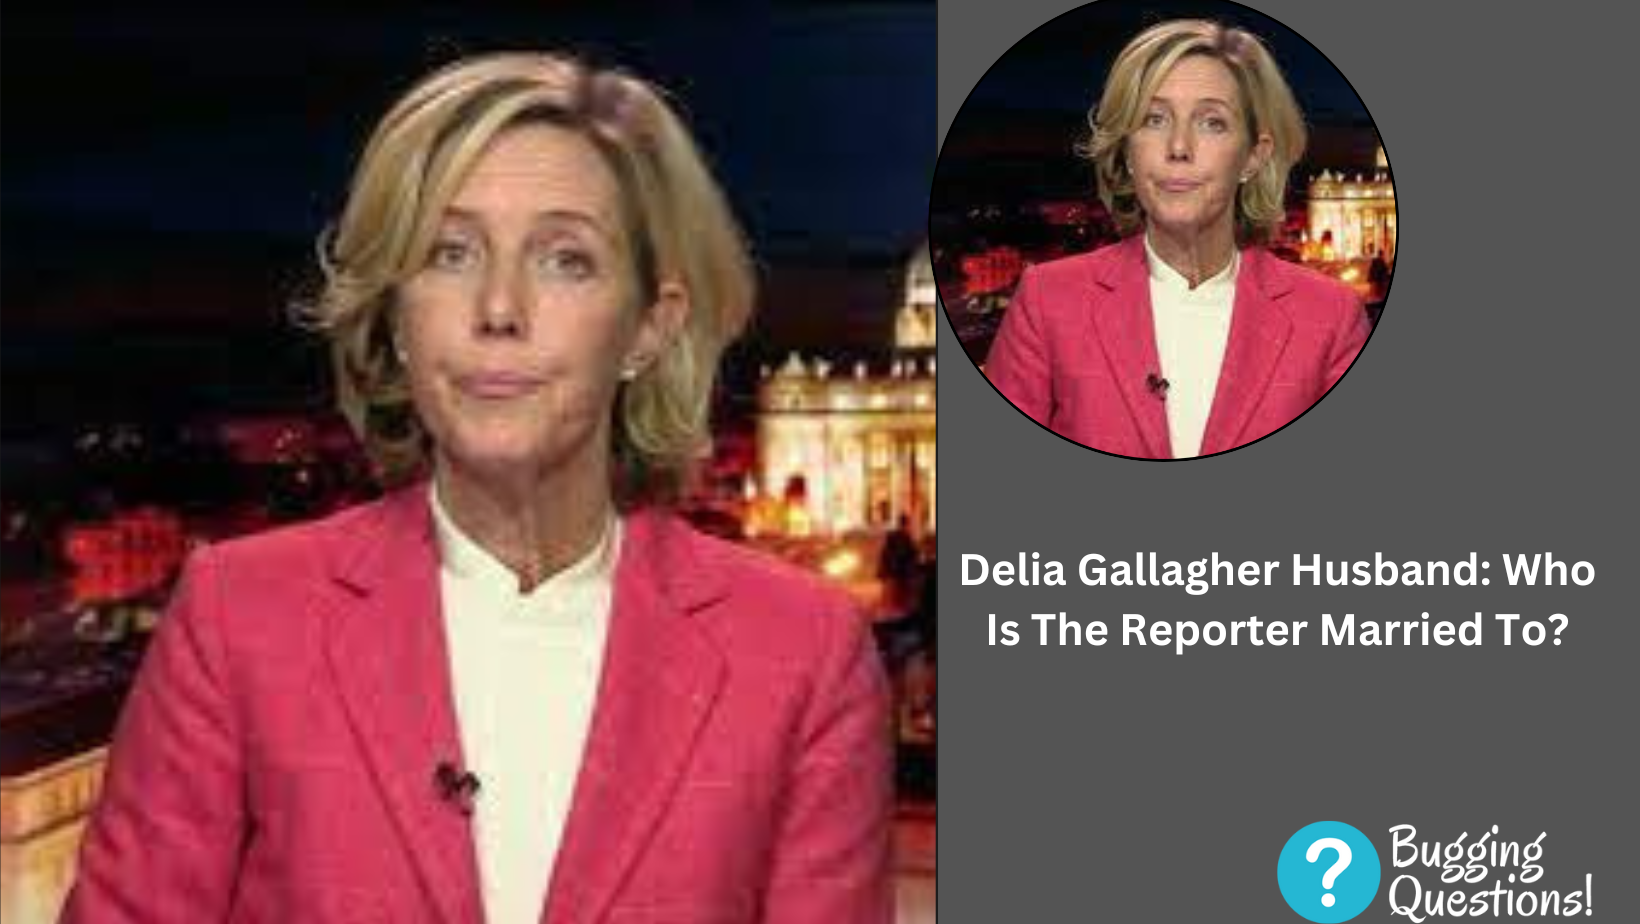 Delia Gallagher Husband: Who Is The Reporter Married To?